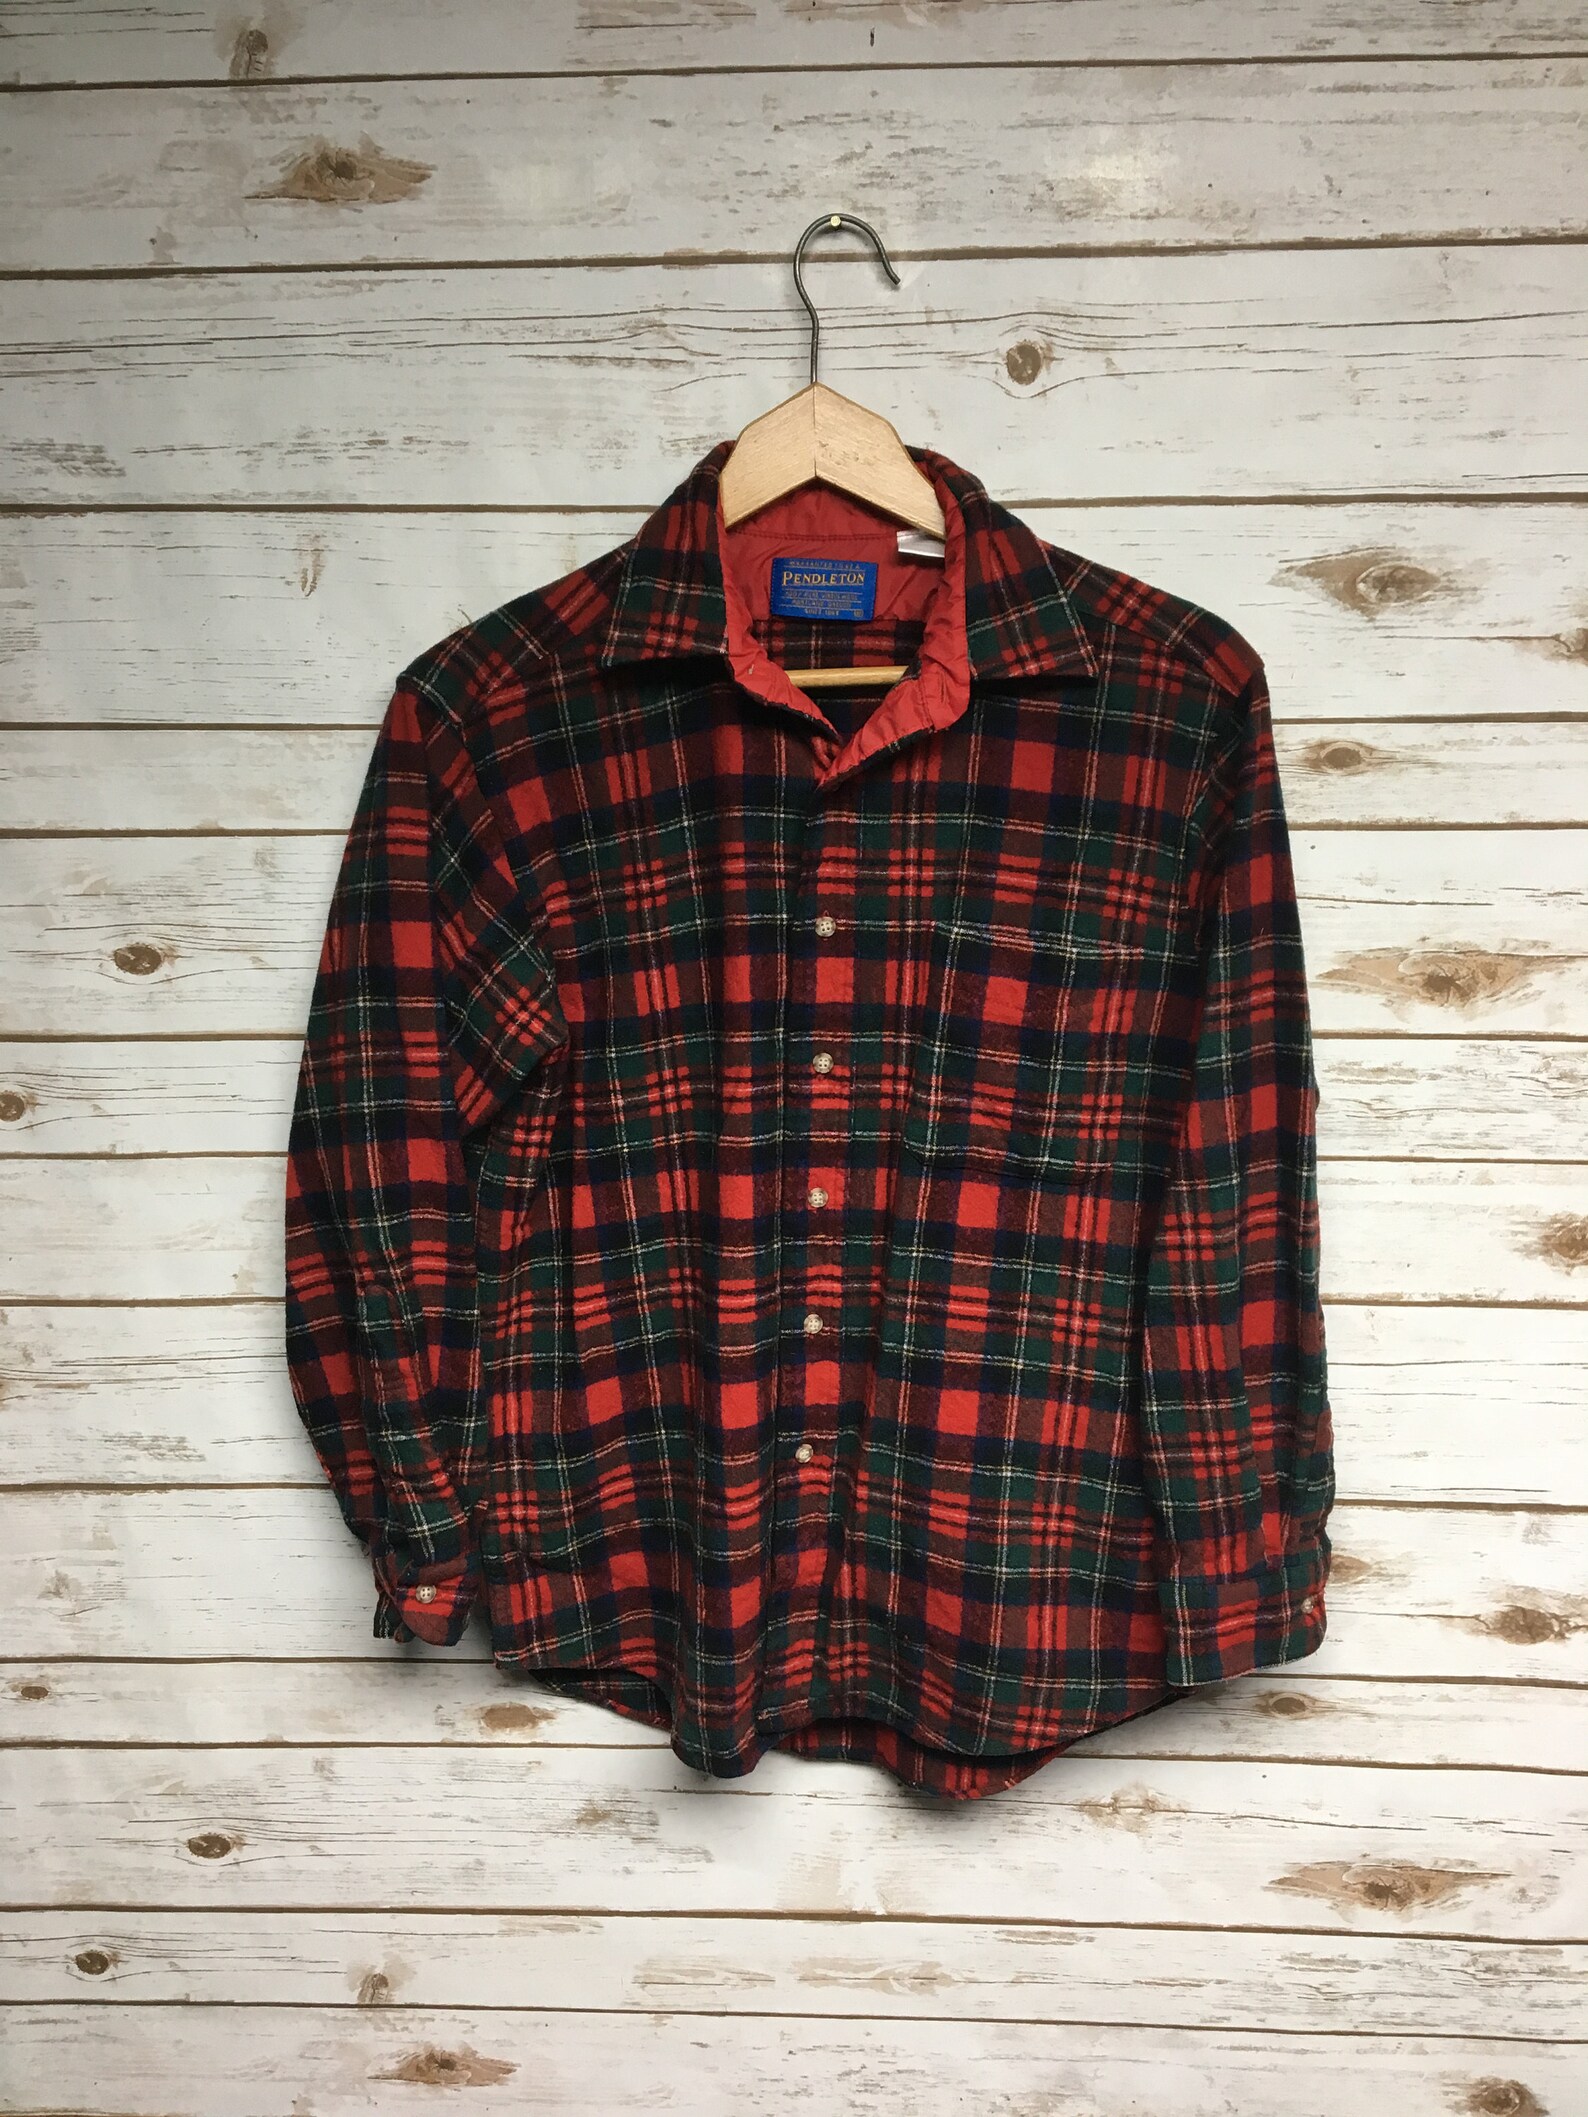 Vintage 90's Pendleton flannel shirt red and green plaid | Etsy